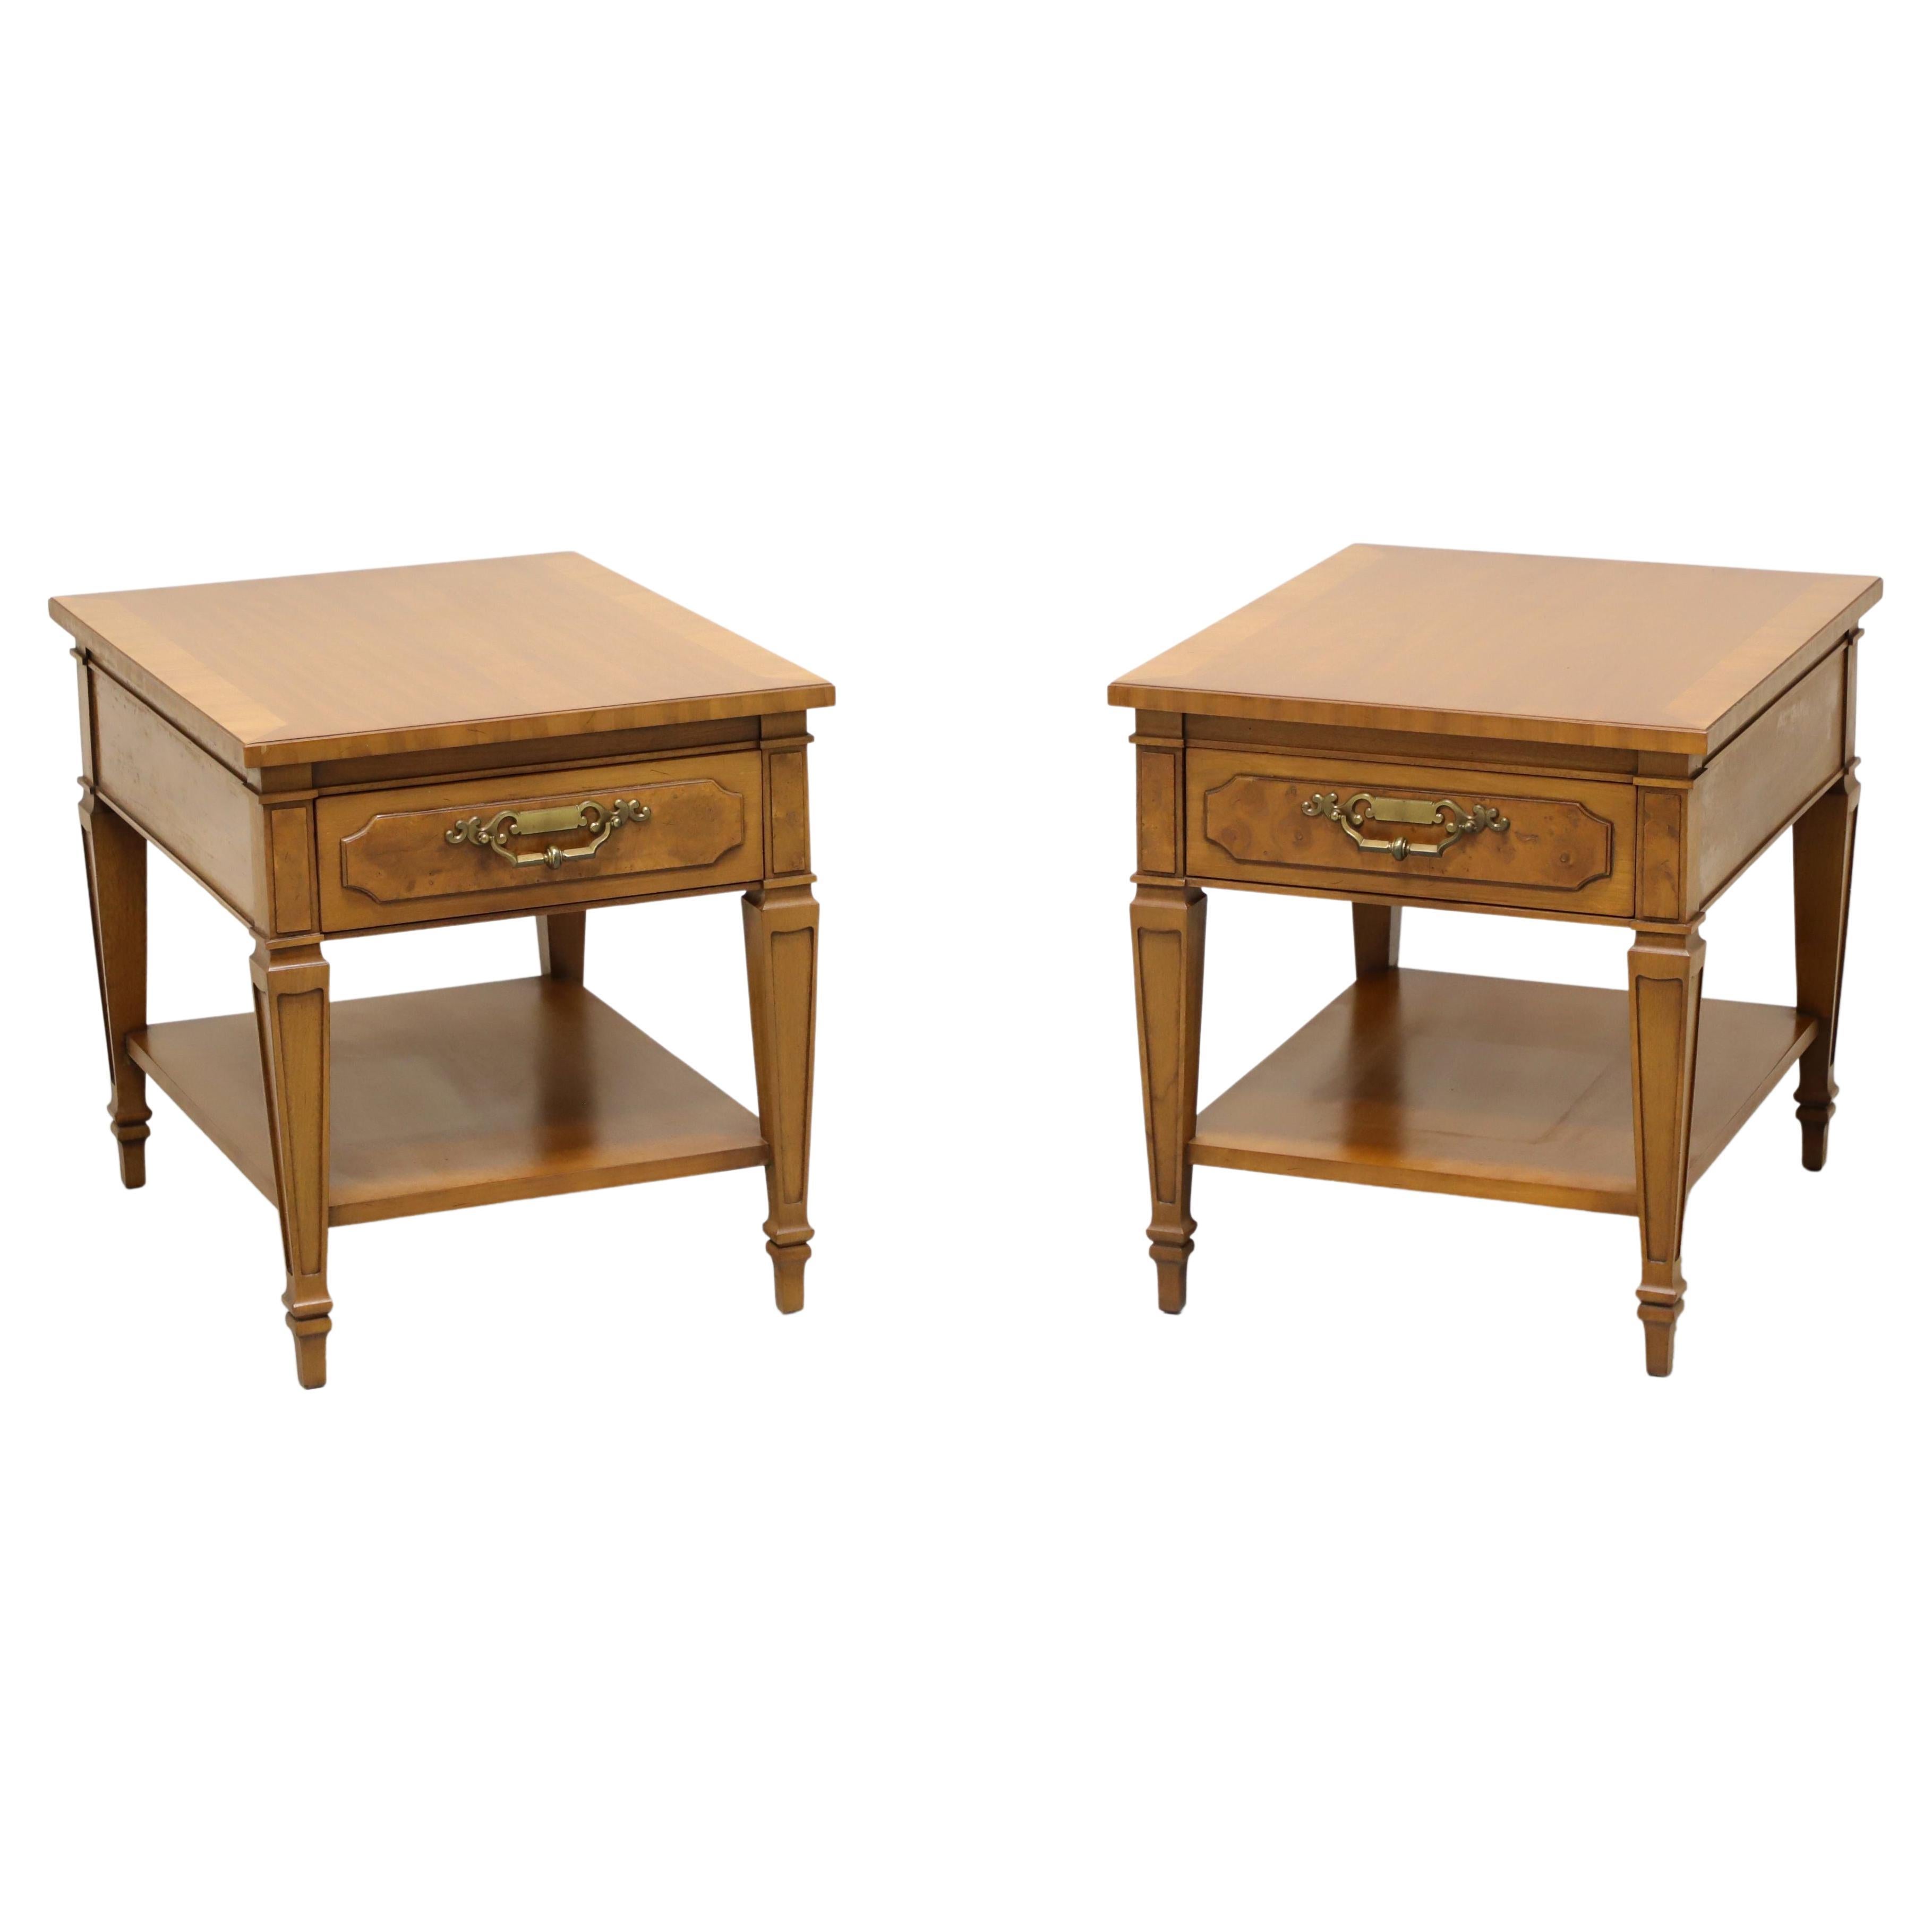 DREXEL HERITAGE "Repertoire" Mid-20th Century End / Side Tables - Pair